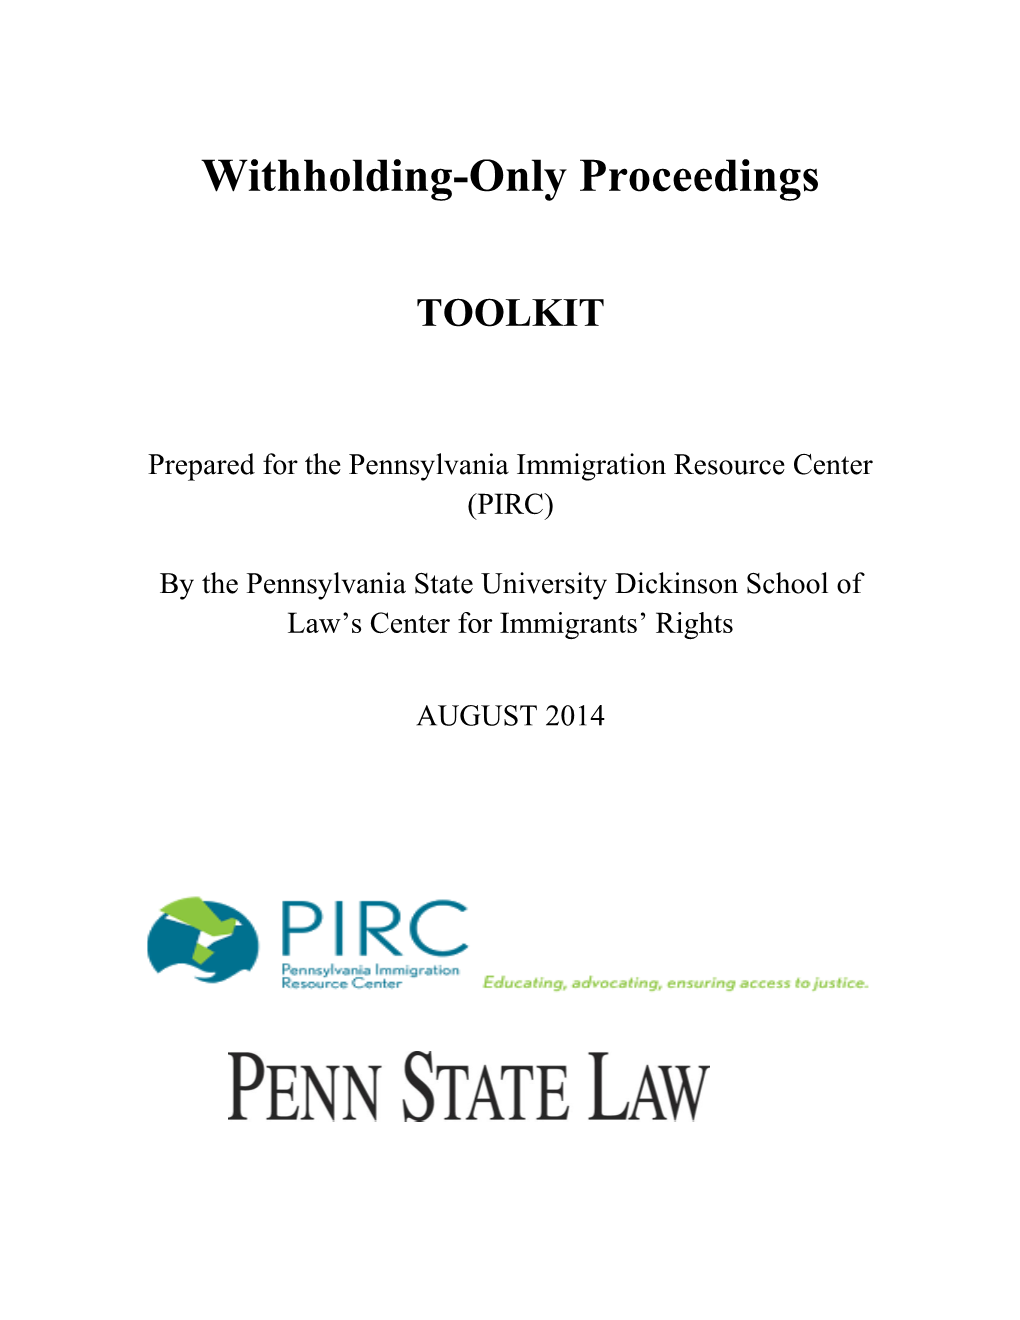 Withholding-Only Proceedings Toolkit for the Pennsylvania Immigration Resource Center (PIRC)